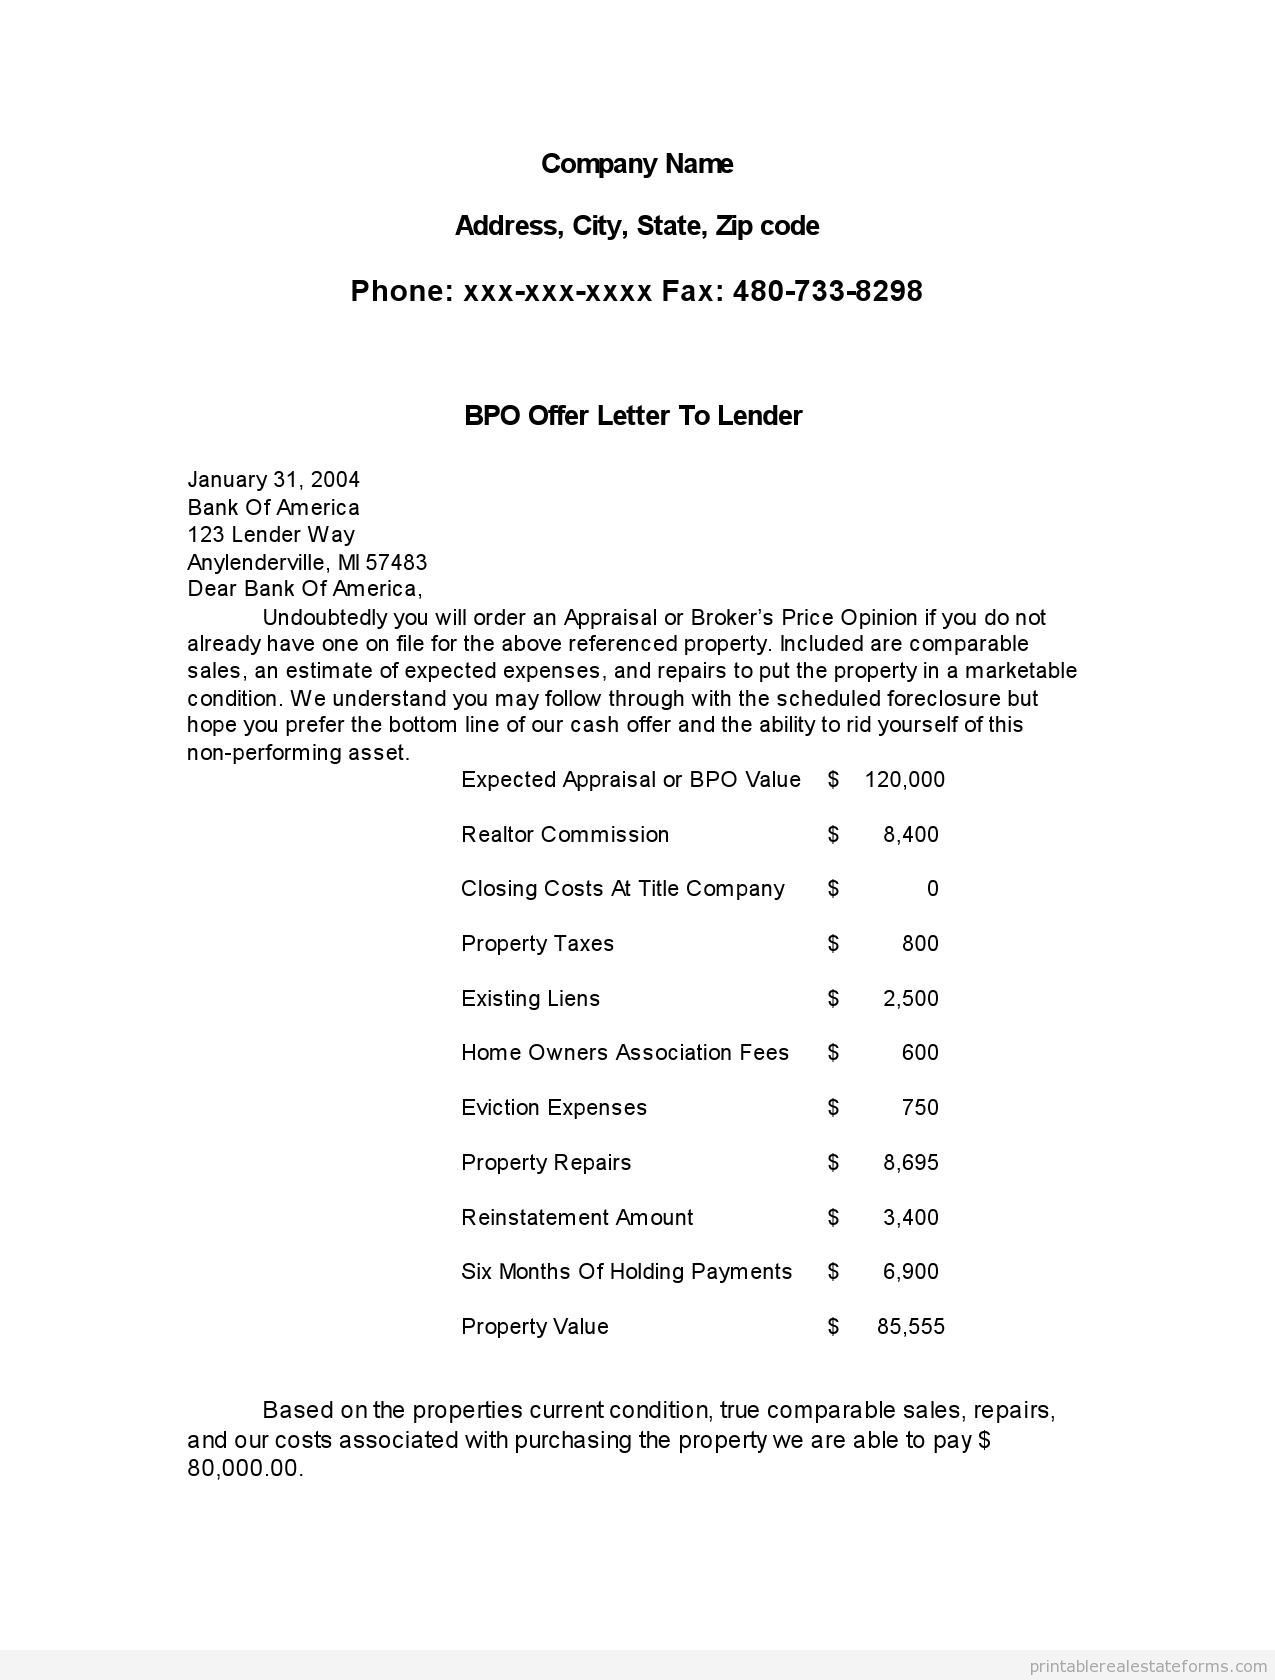 Free foreclosure Letter Template - Printable Bpo Letter to Bank Template 2015